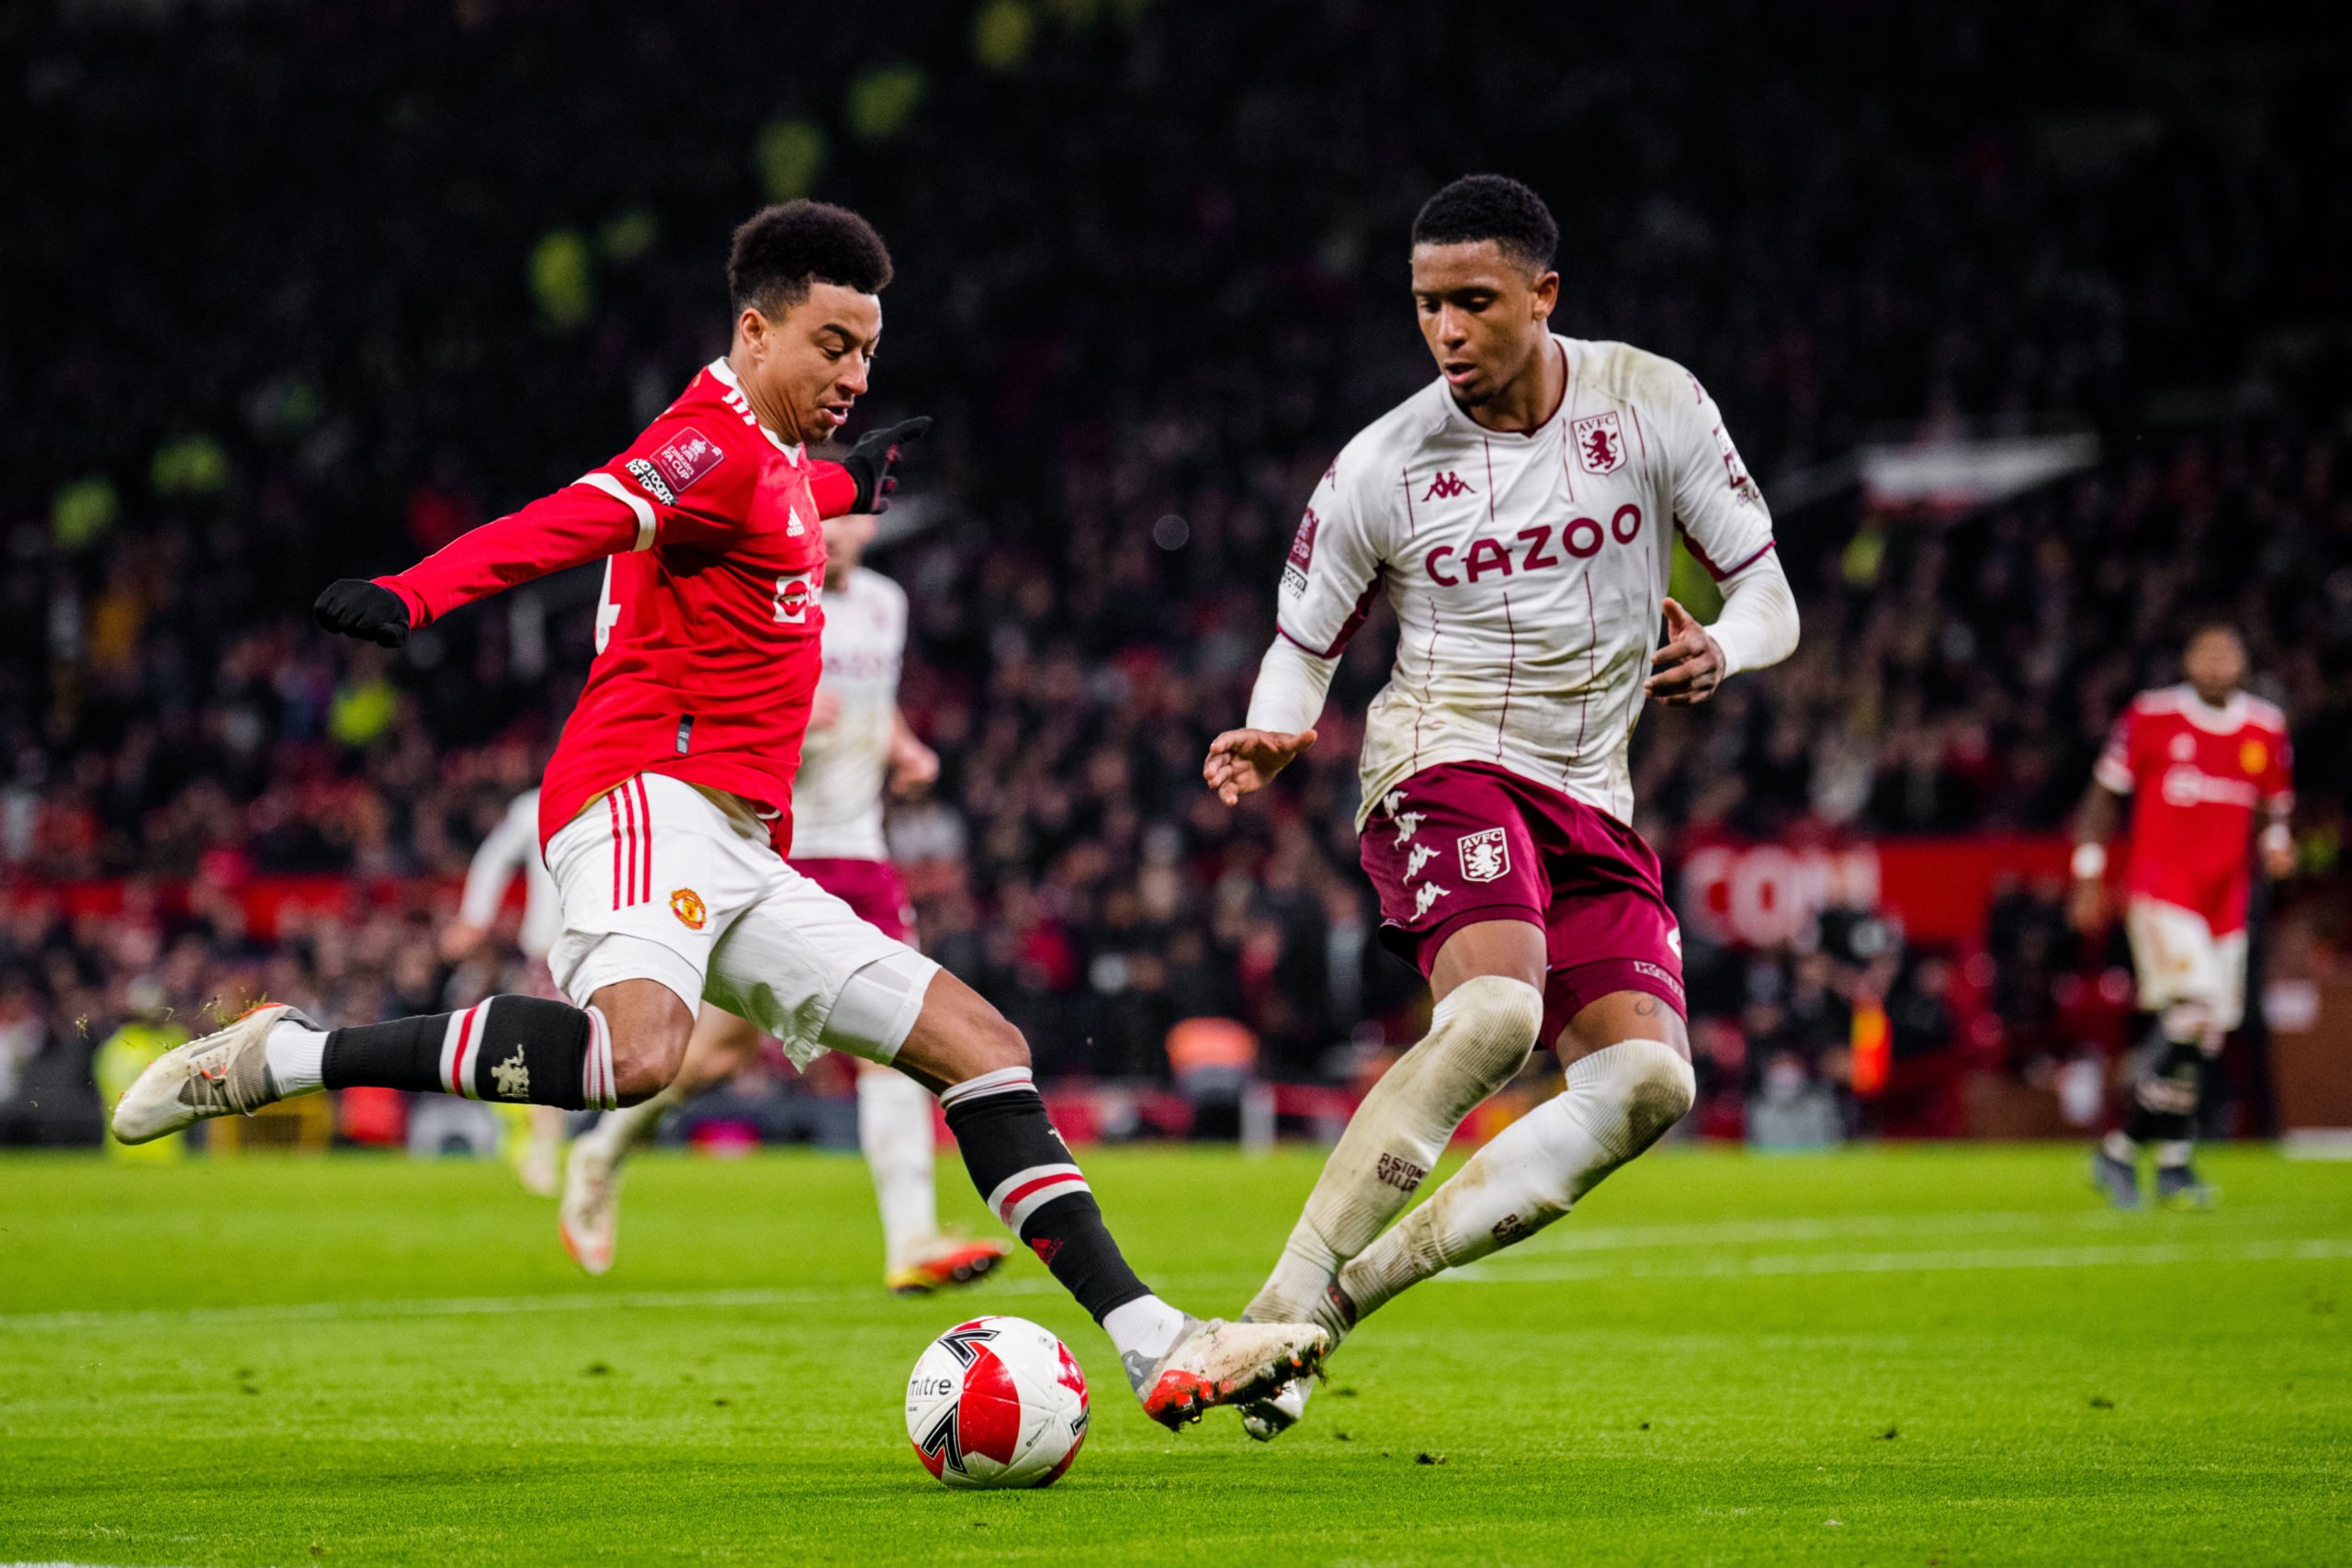 David Ornstein thinks West Ham target Jesse Lingard will leave Manchester United this month